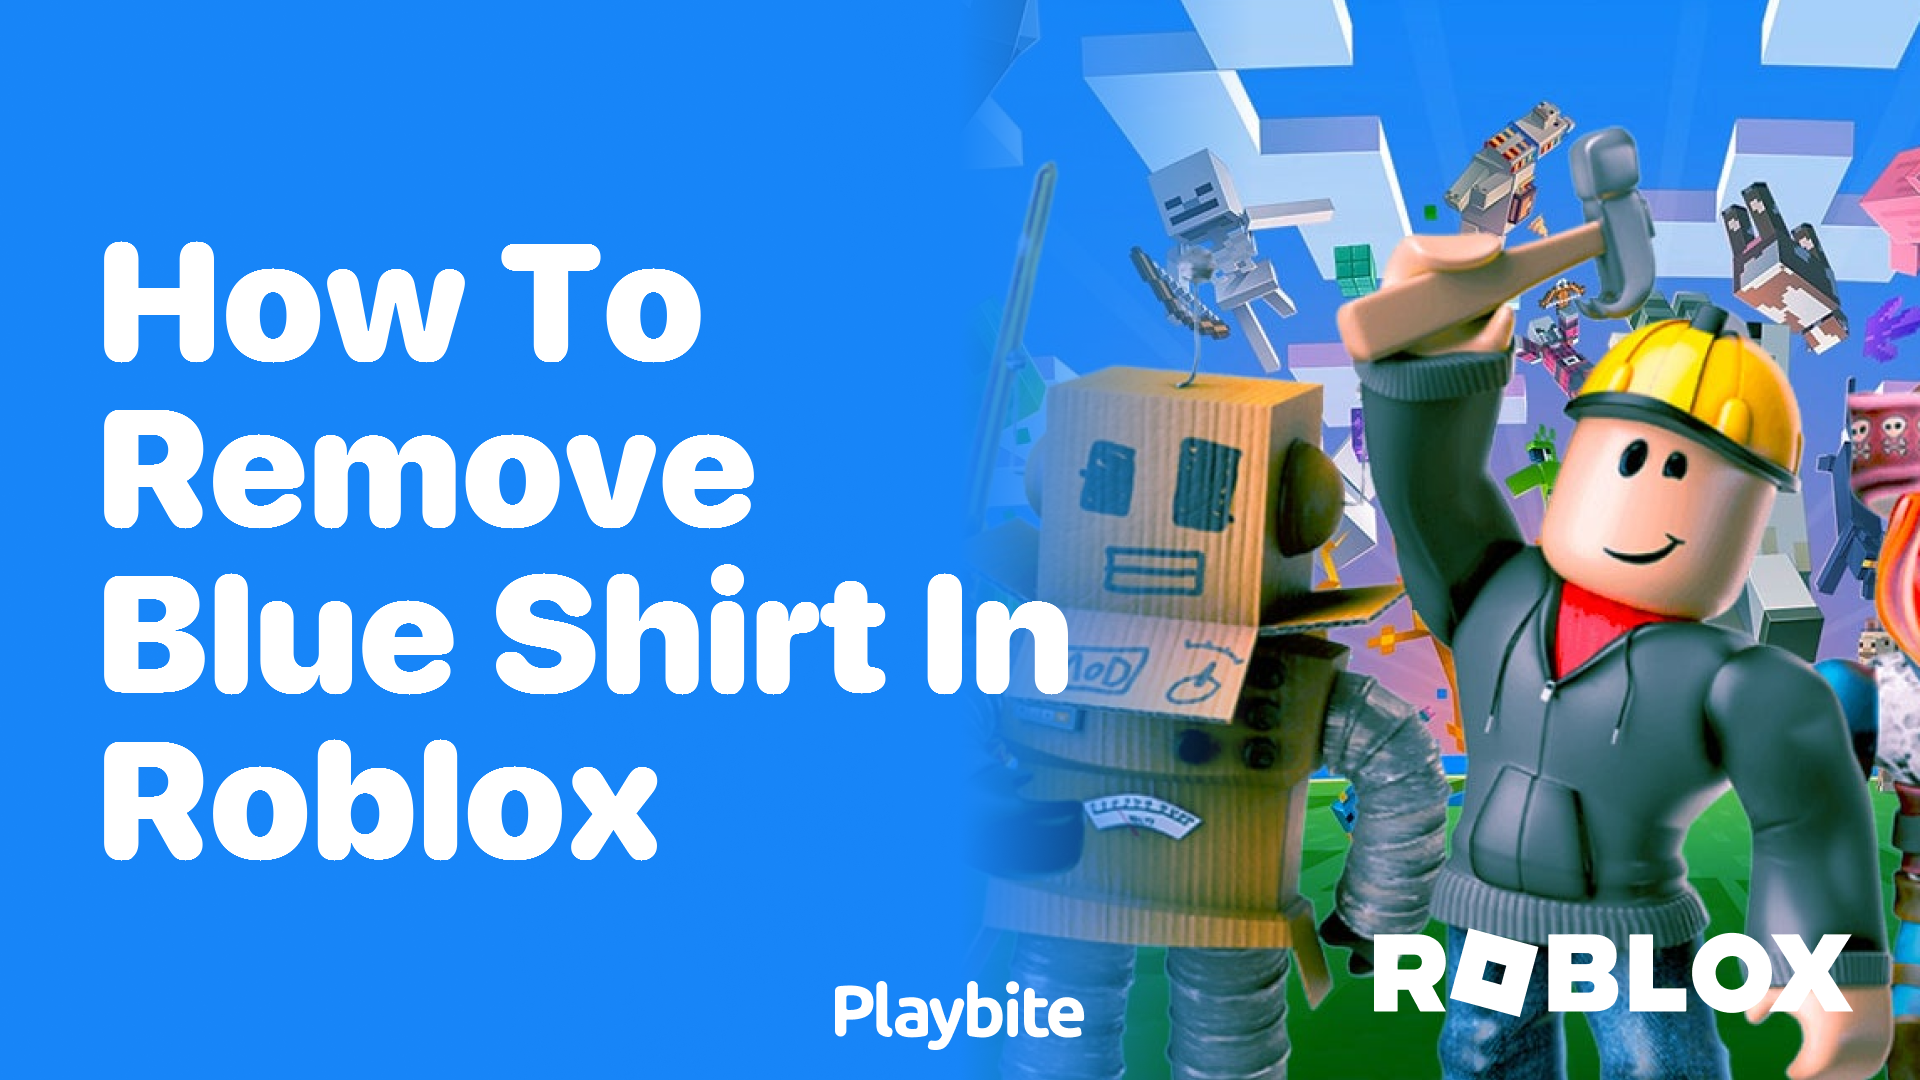 How to Remove the Blue Shirt in Roblox